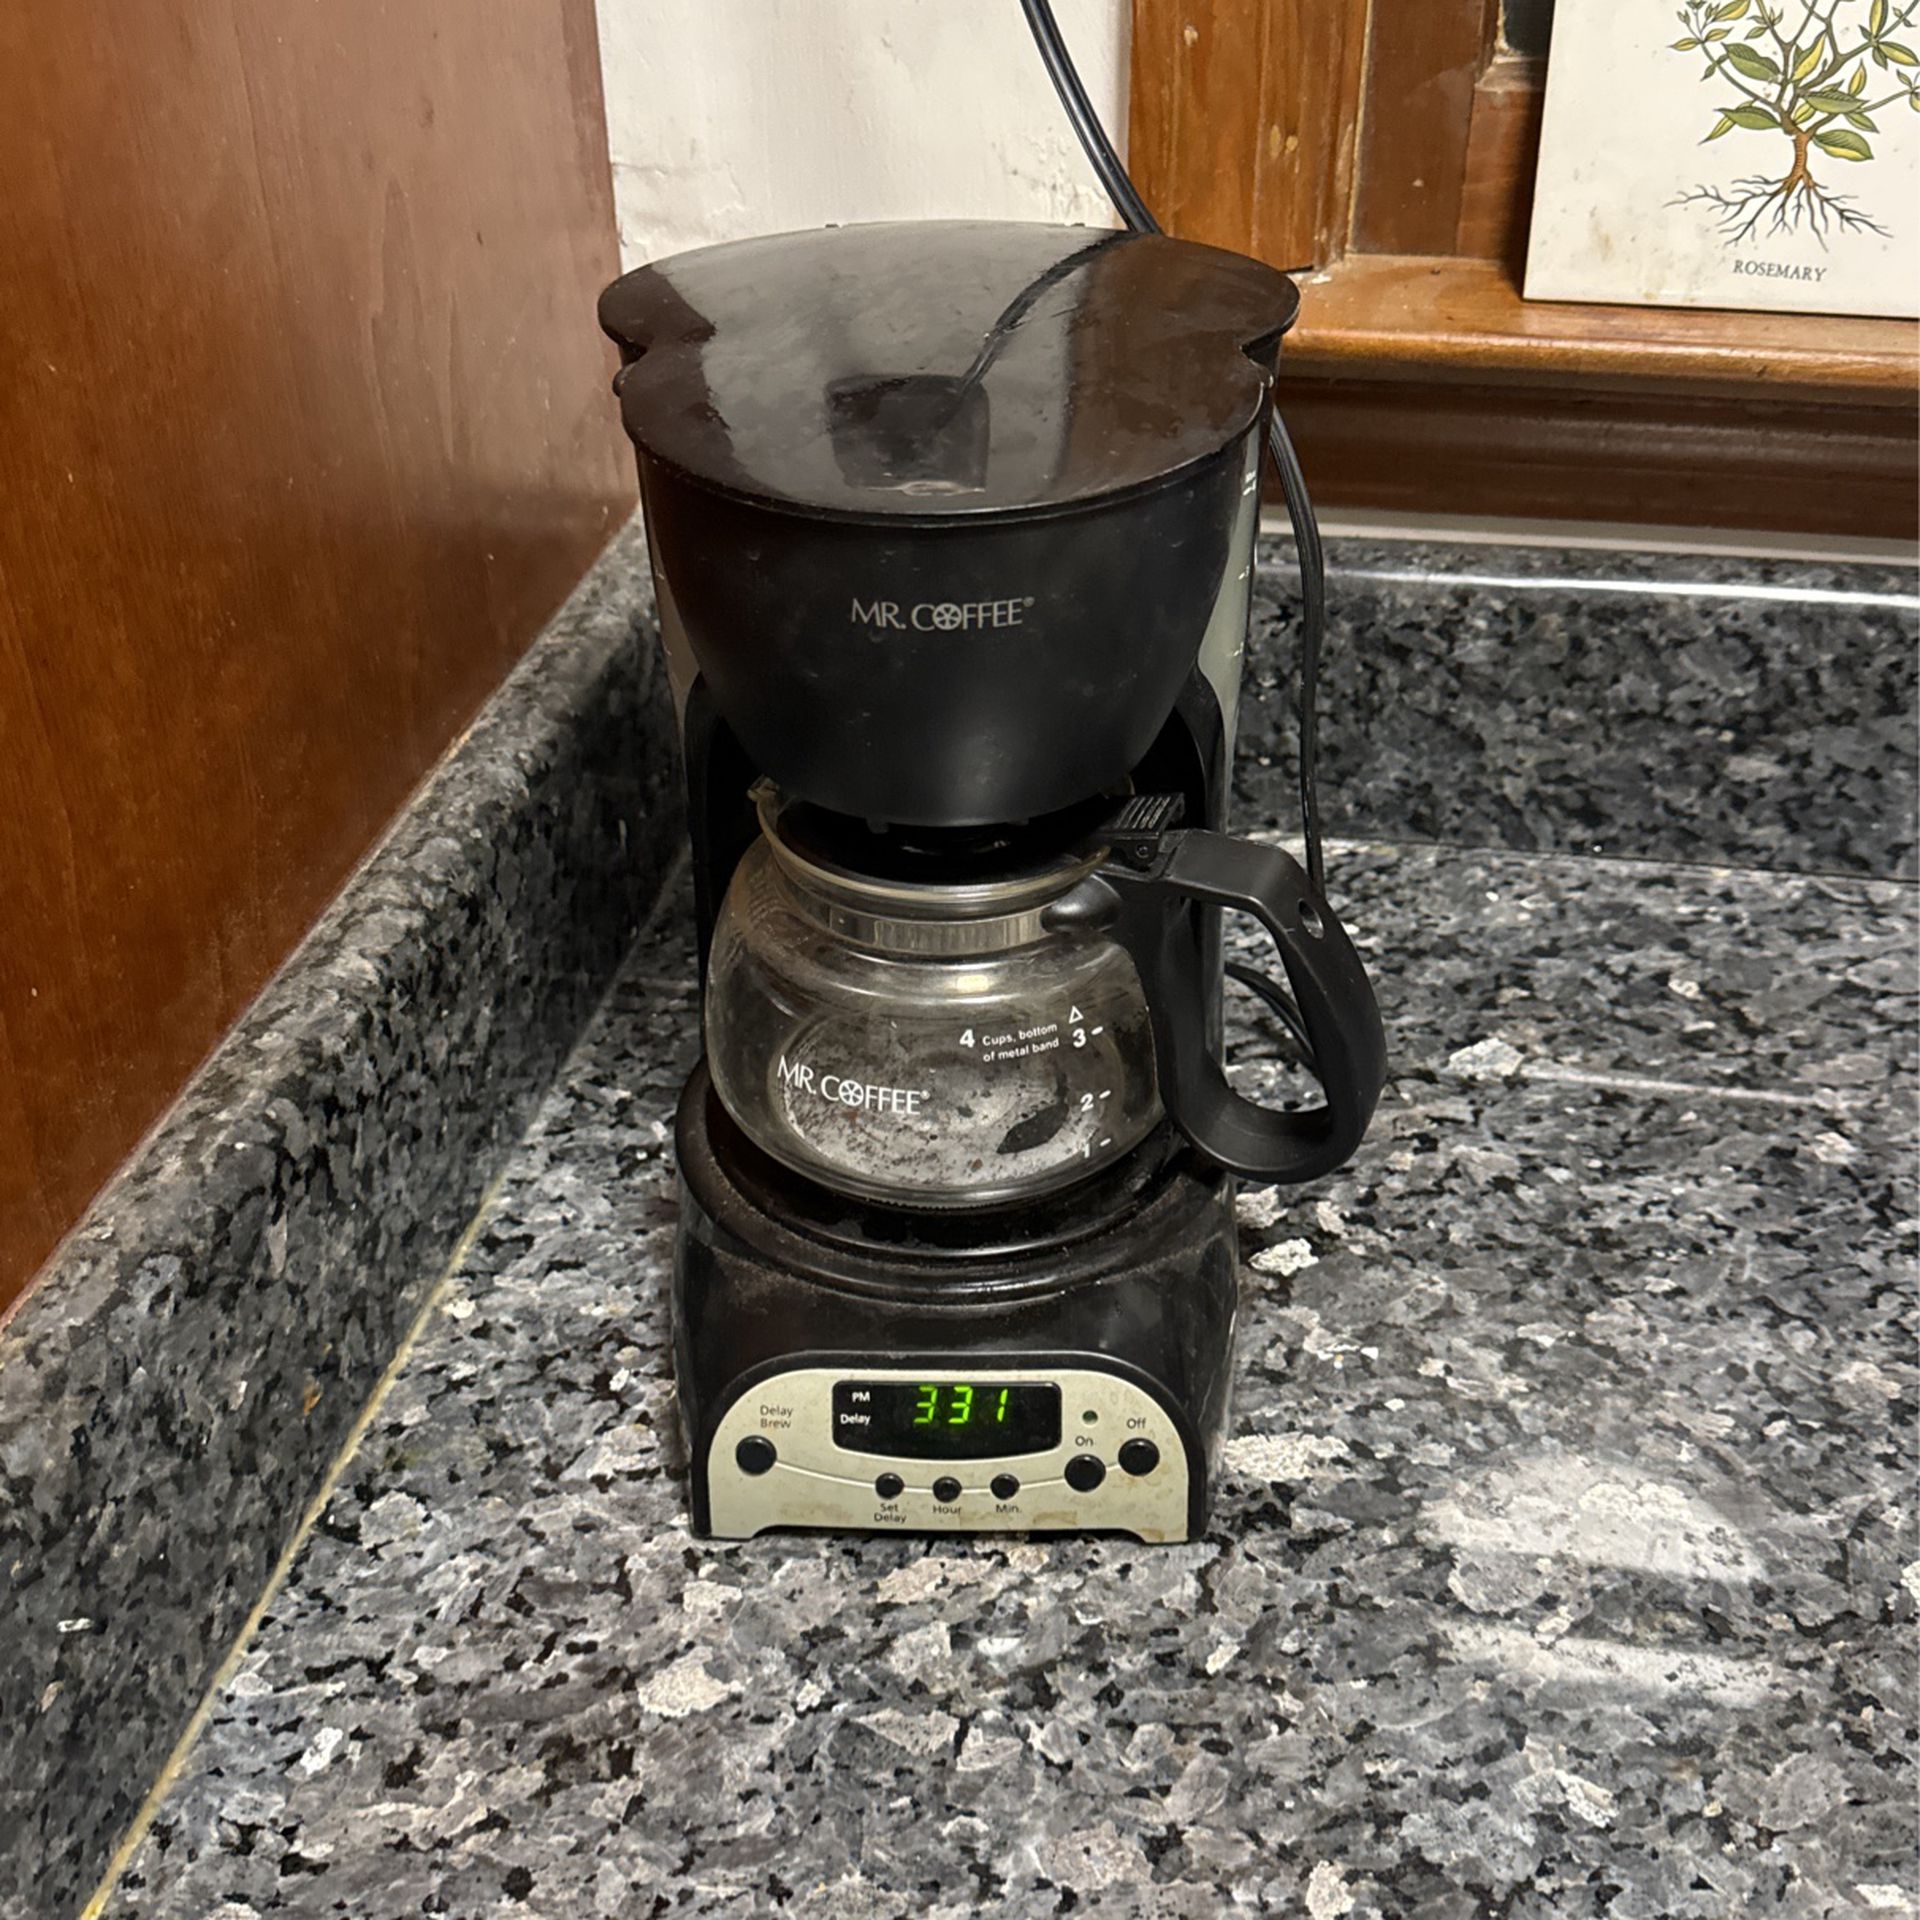 The Mr. coffee, 4 cup coffee maker with timer and delay